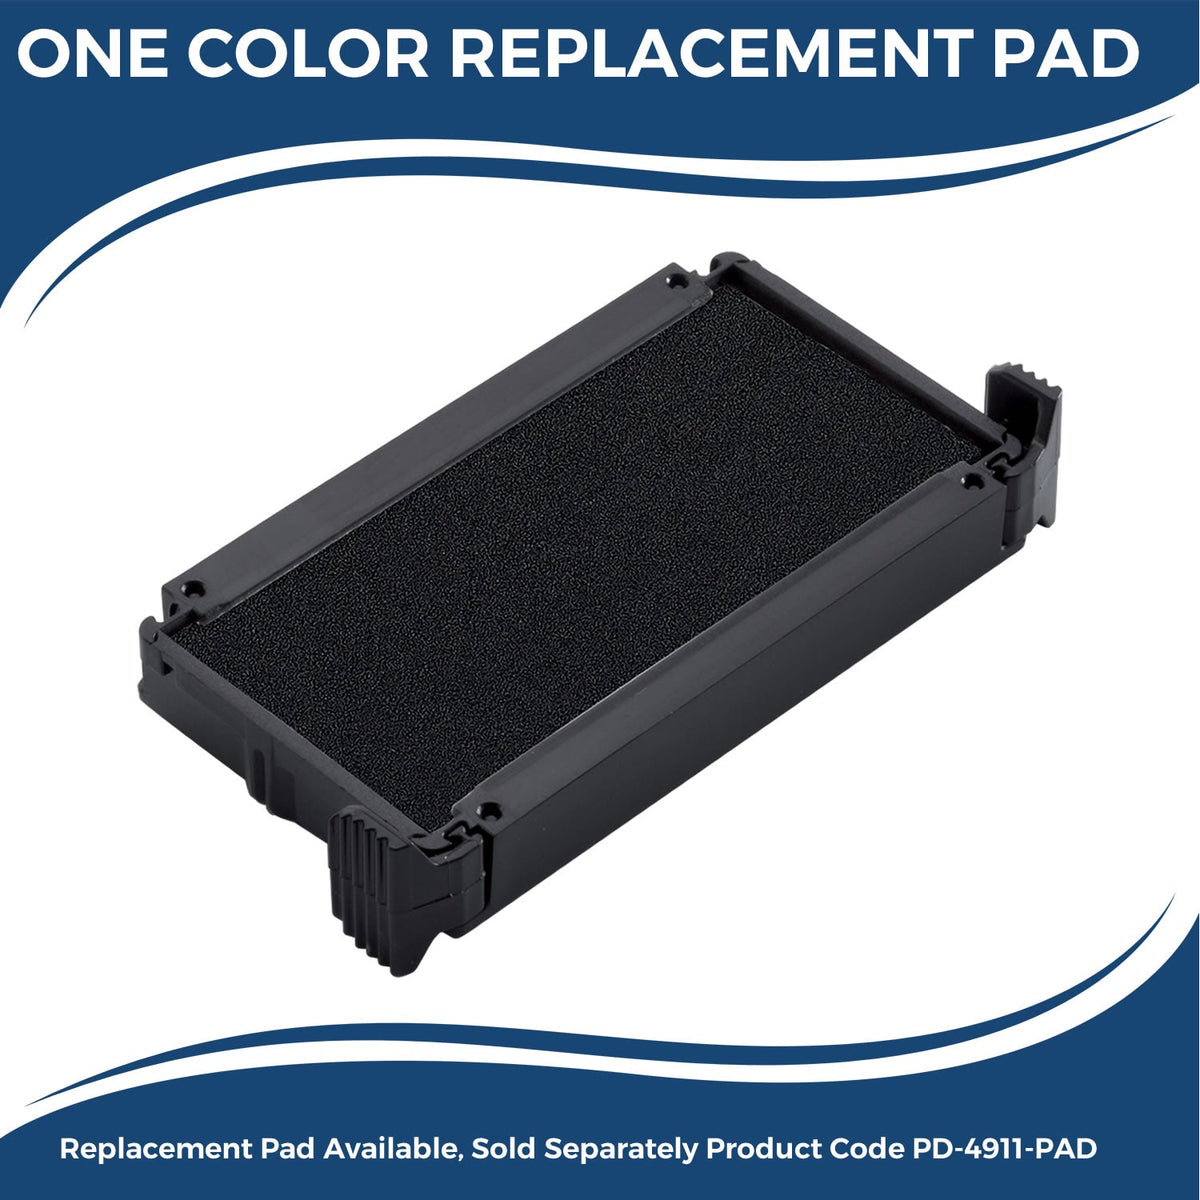 Replacement Pad for Self-Inking Please Review with your child Stamp